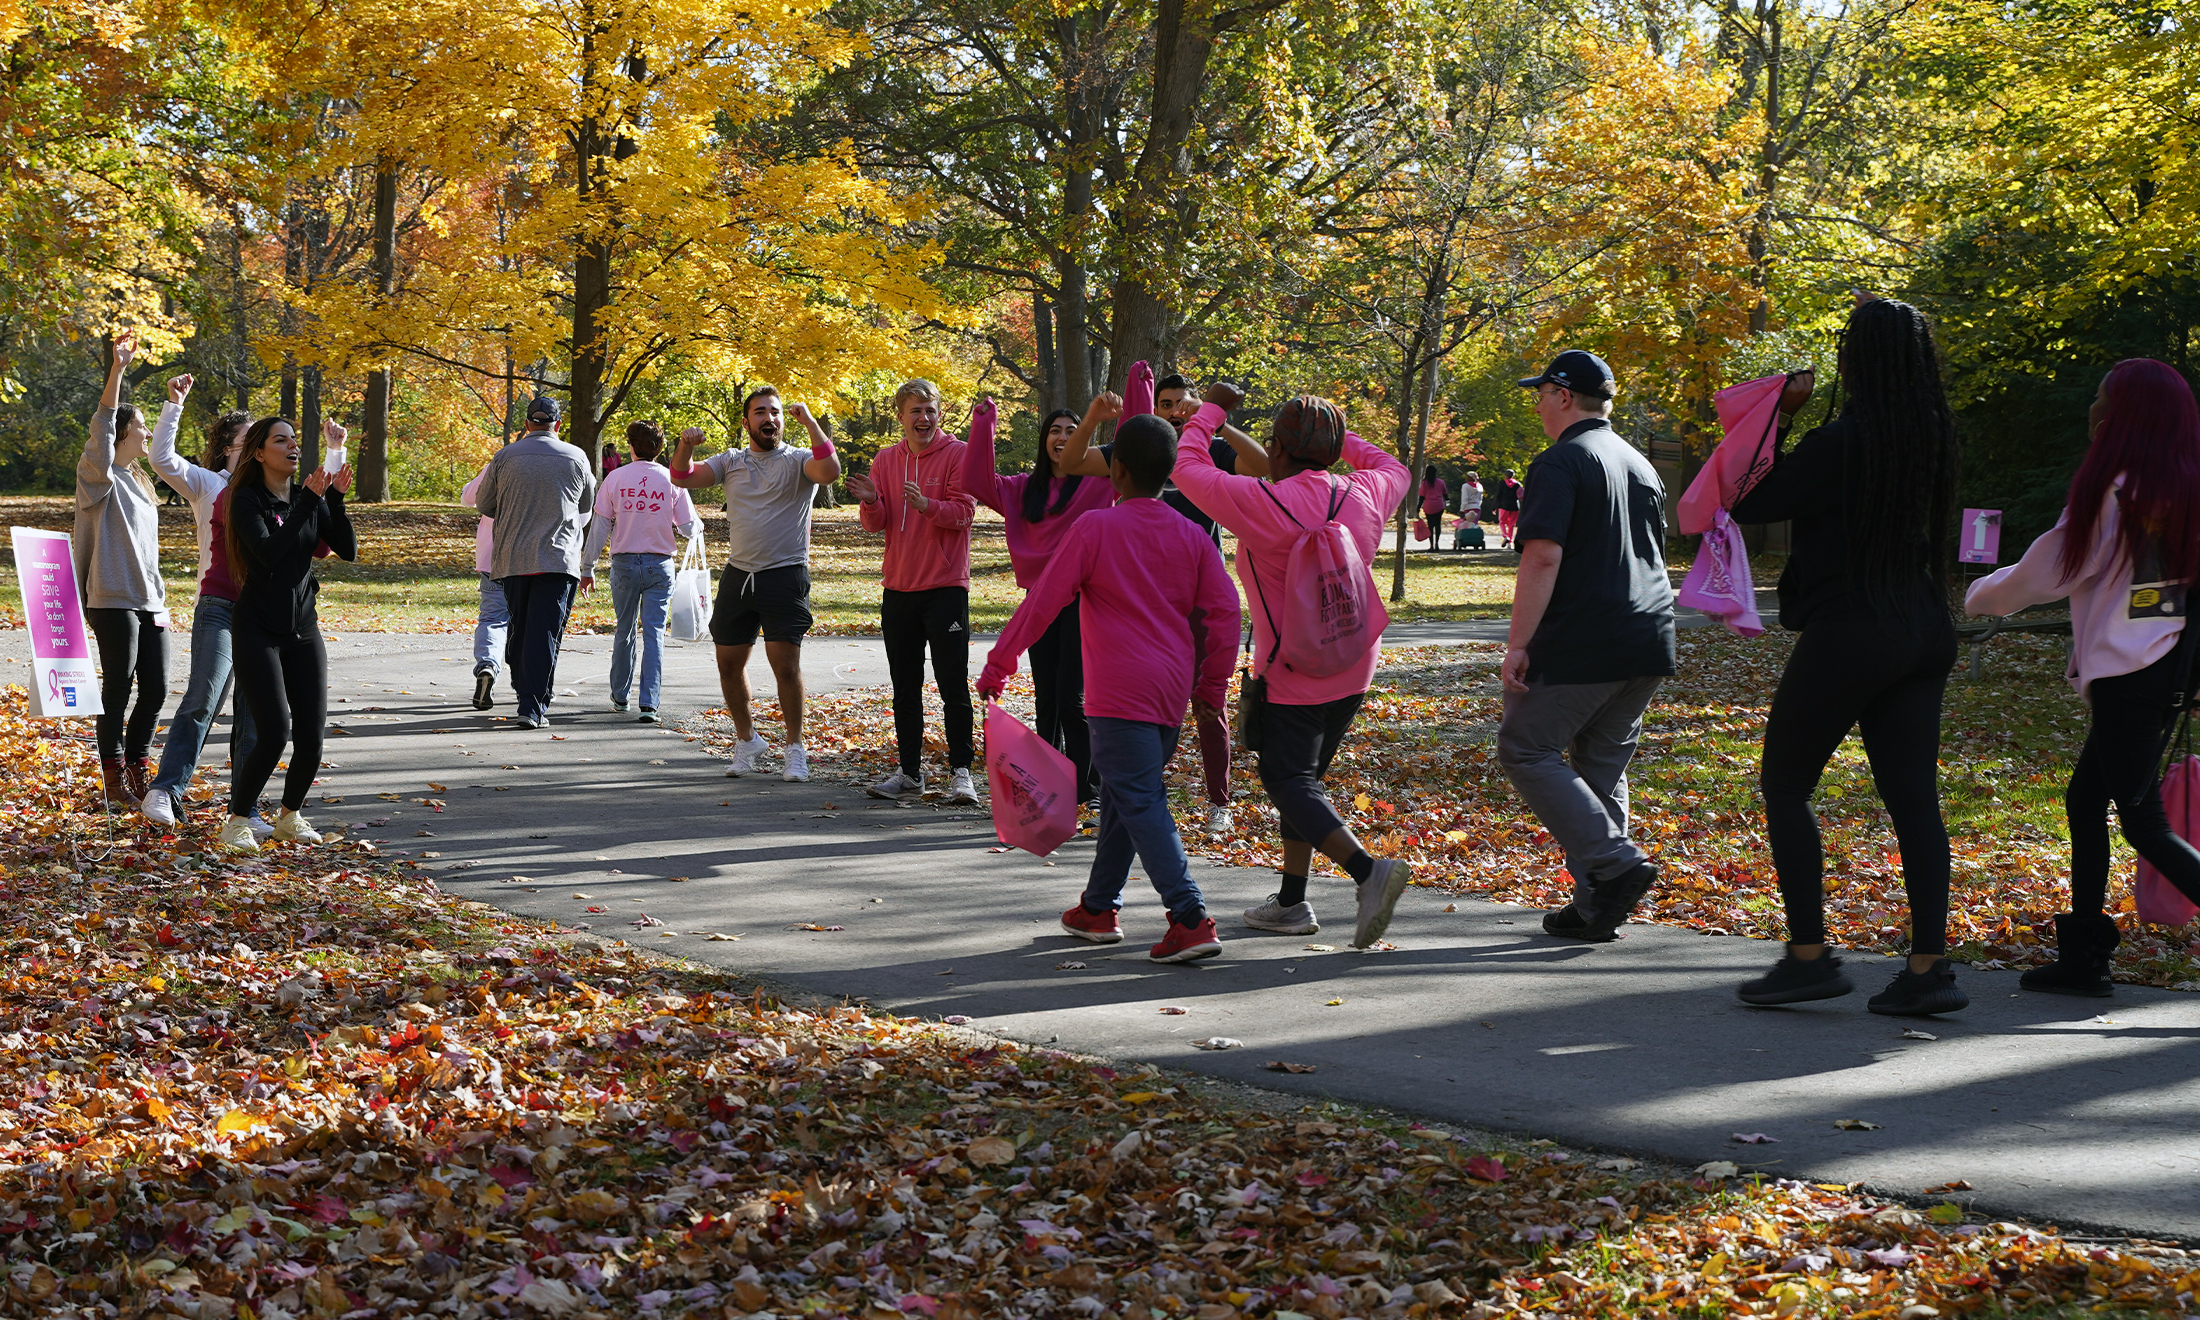 An image of students at the Making Strides Against Breast Cancer event in October 2022